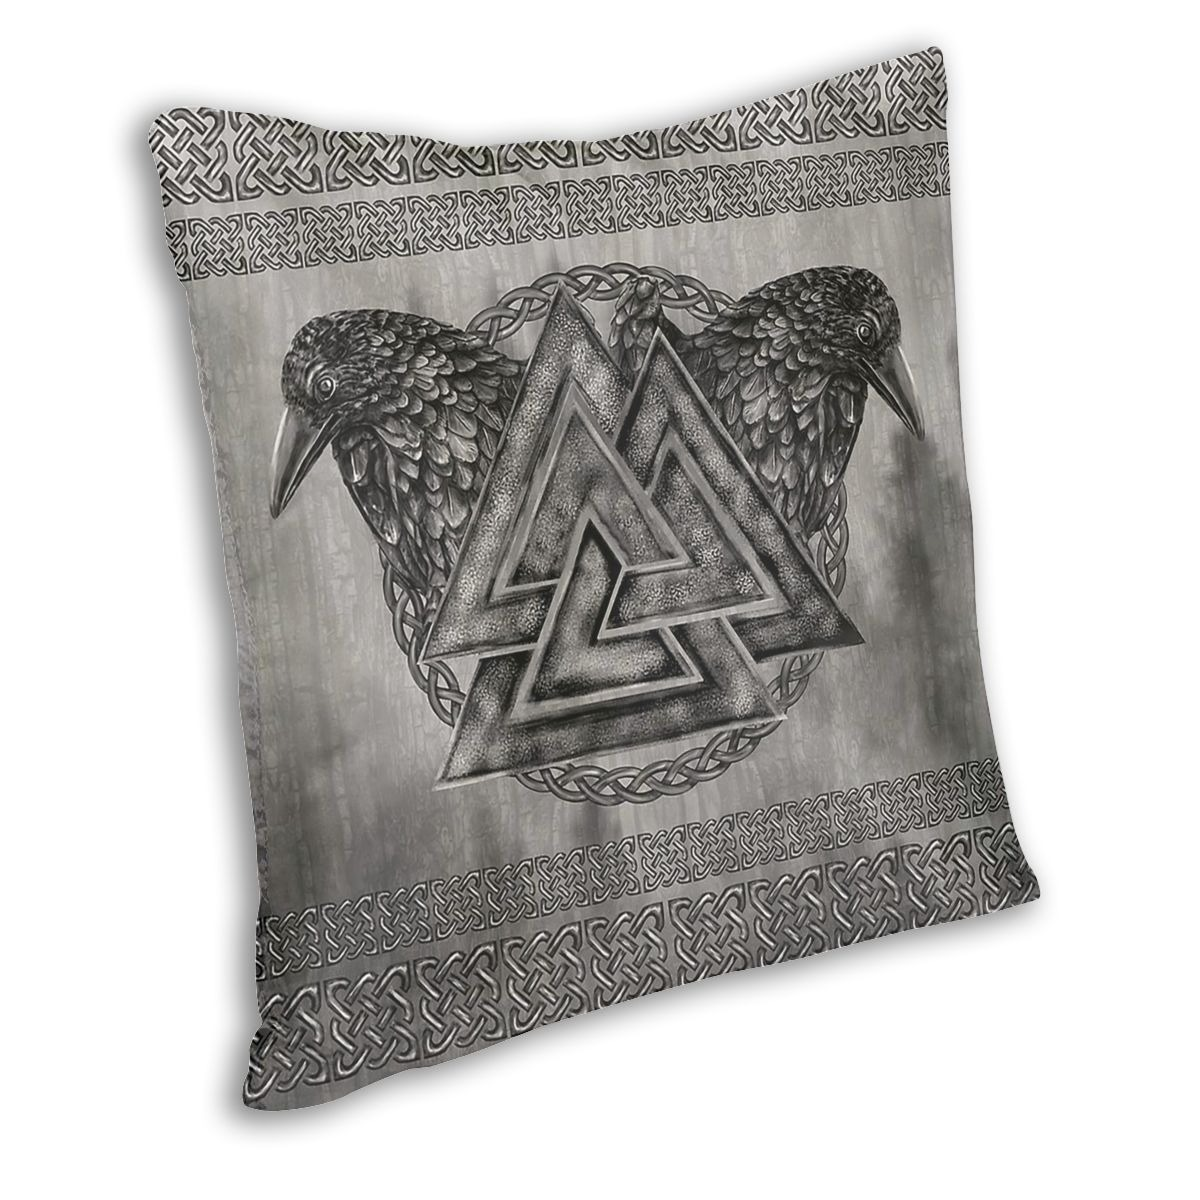 Decorative Pillow Cover with Valknut Symbol And Ravens Viking / Double-sided Printing on Cushions #2 - HARD'N'HEAVY